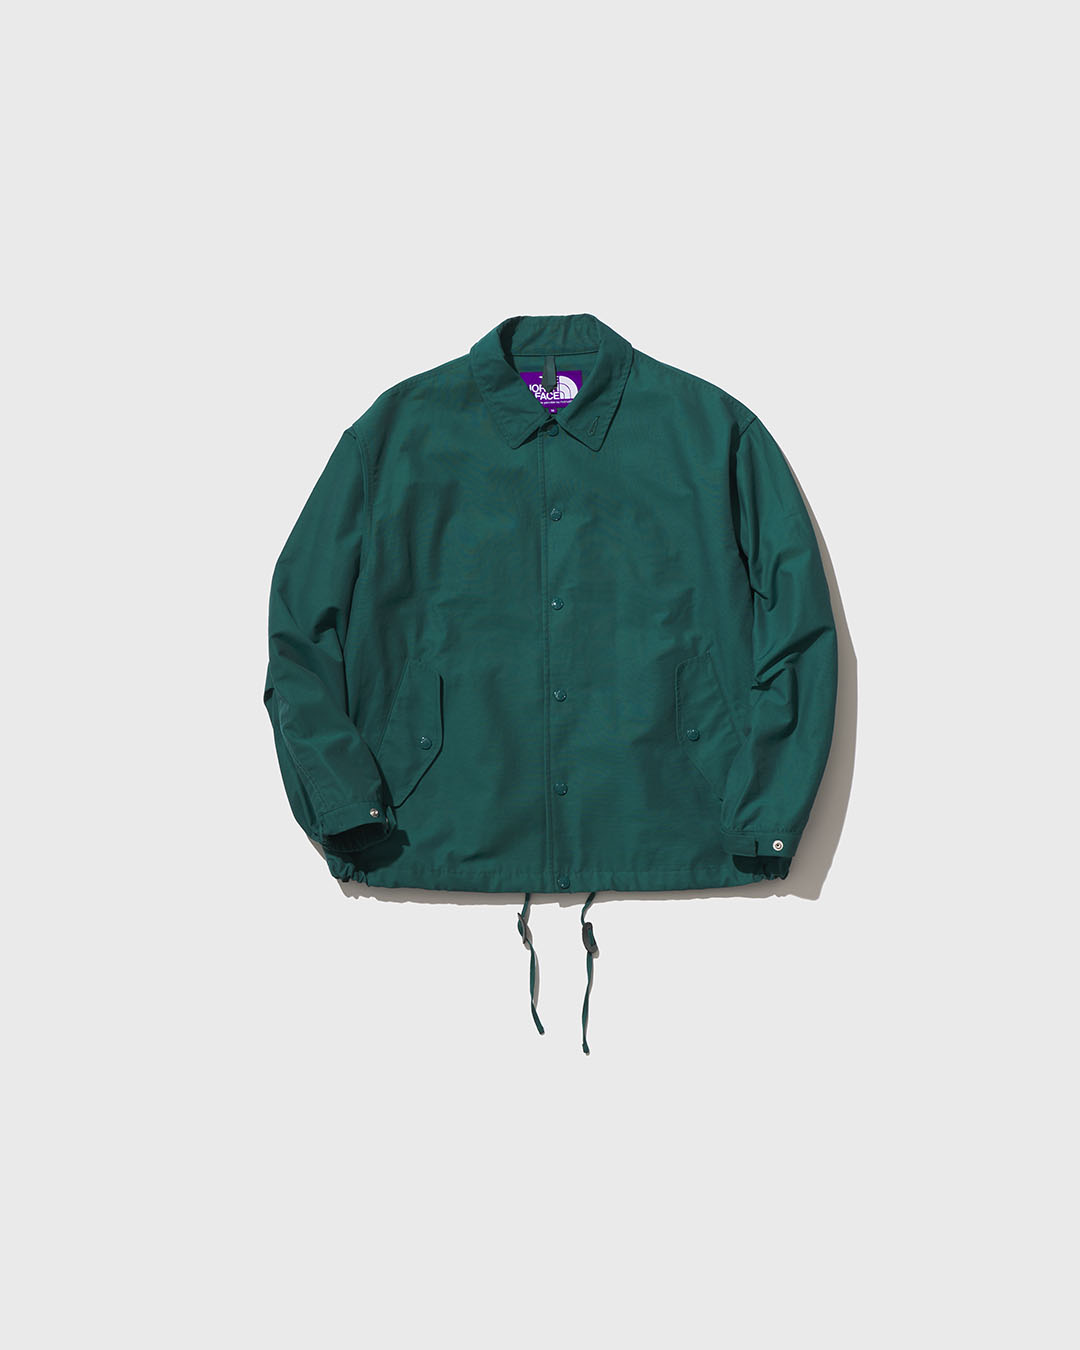 THE NORTH FACE PURPLE LABEL / Featured Product vol.32